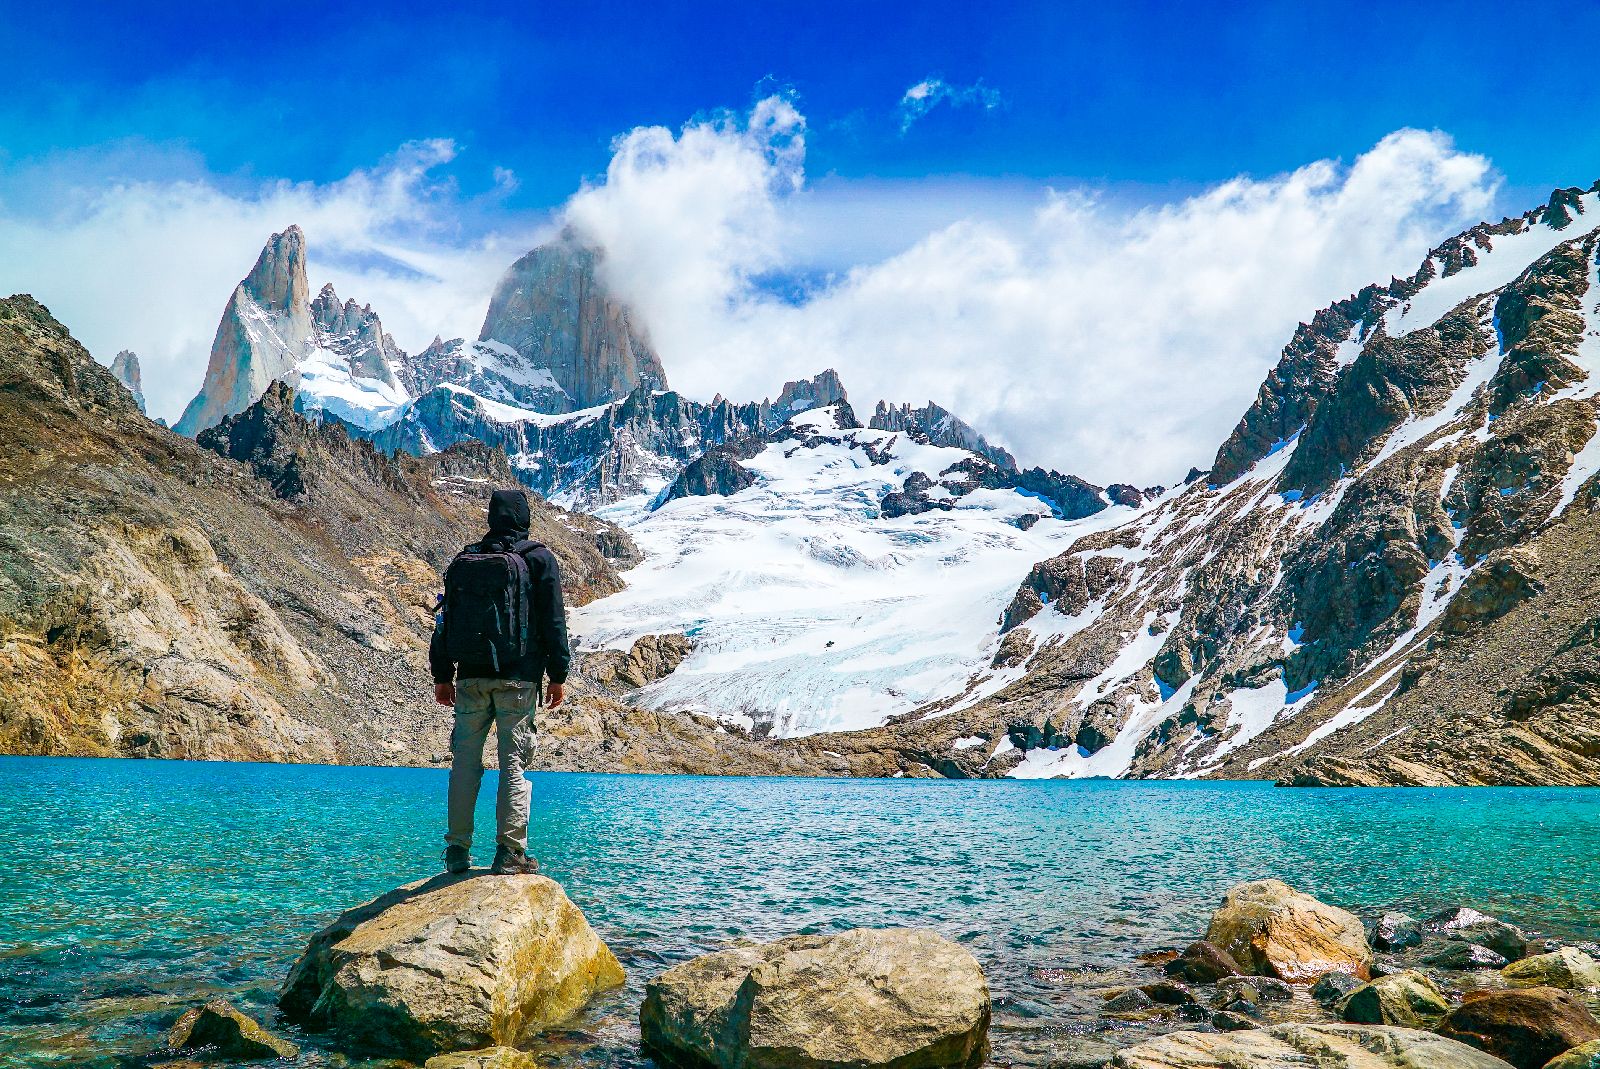 Guest admiring the Fitzroy scenery on a hike from Explora El Chalten in Patagonia Argentina